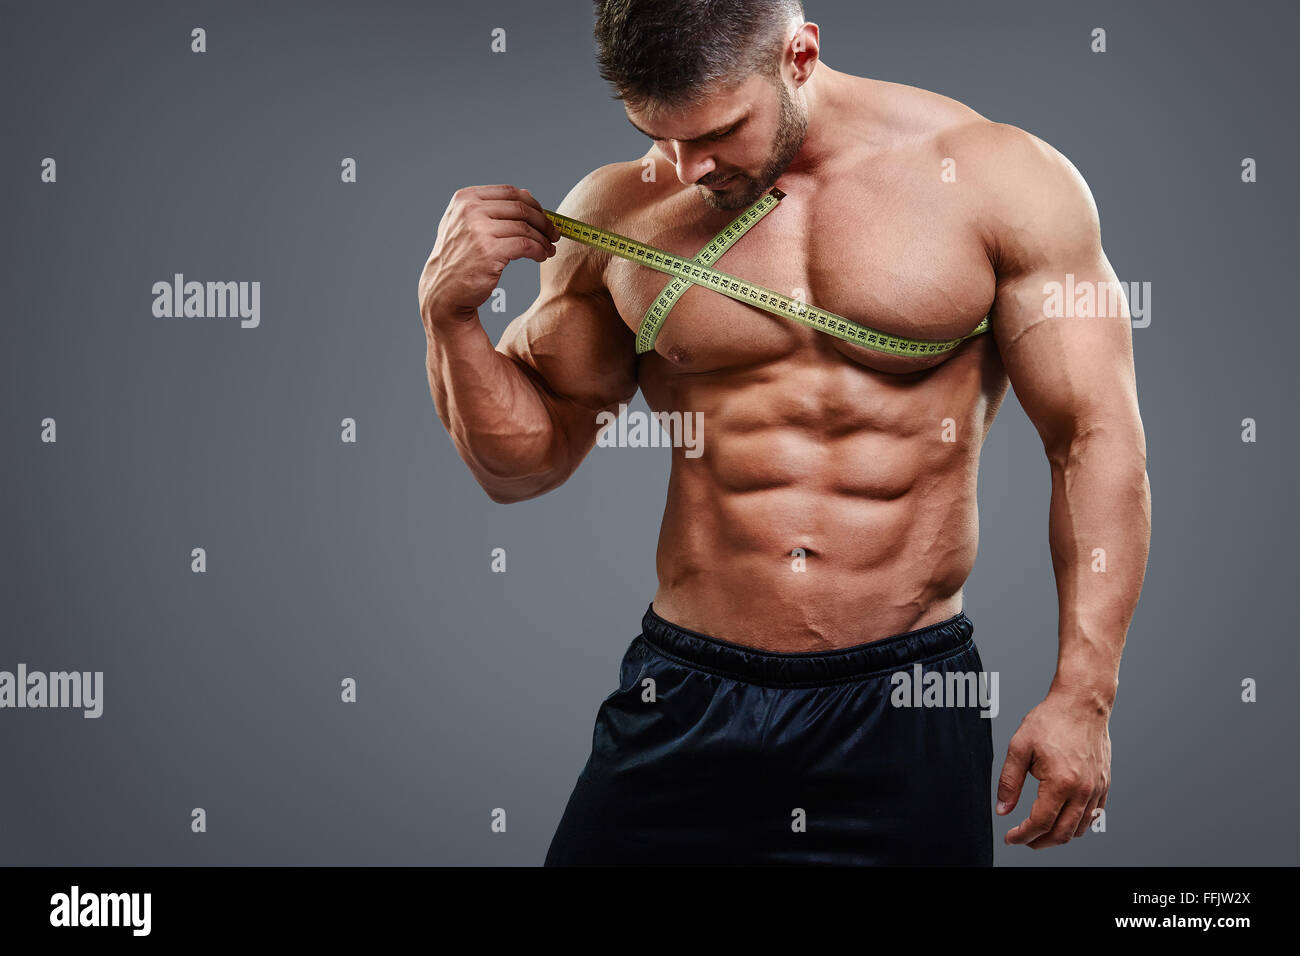 Bodybuilder measuring chest with tape measure Stock Photo